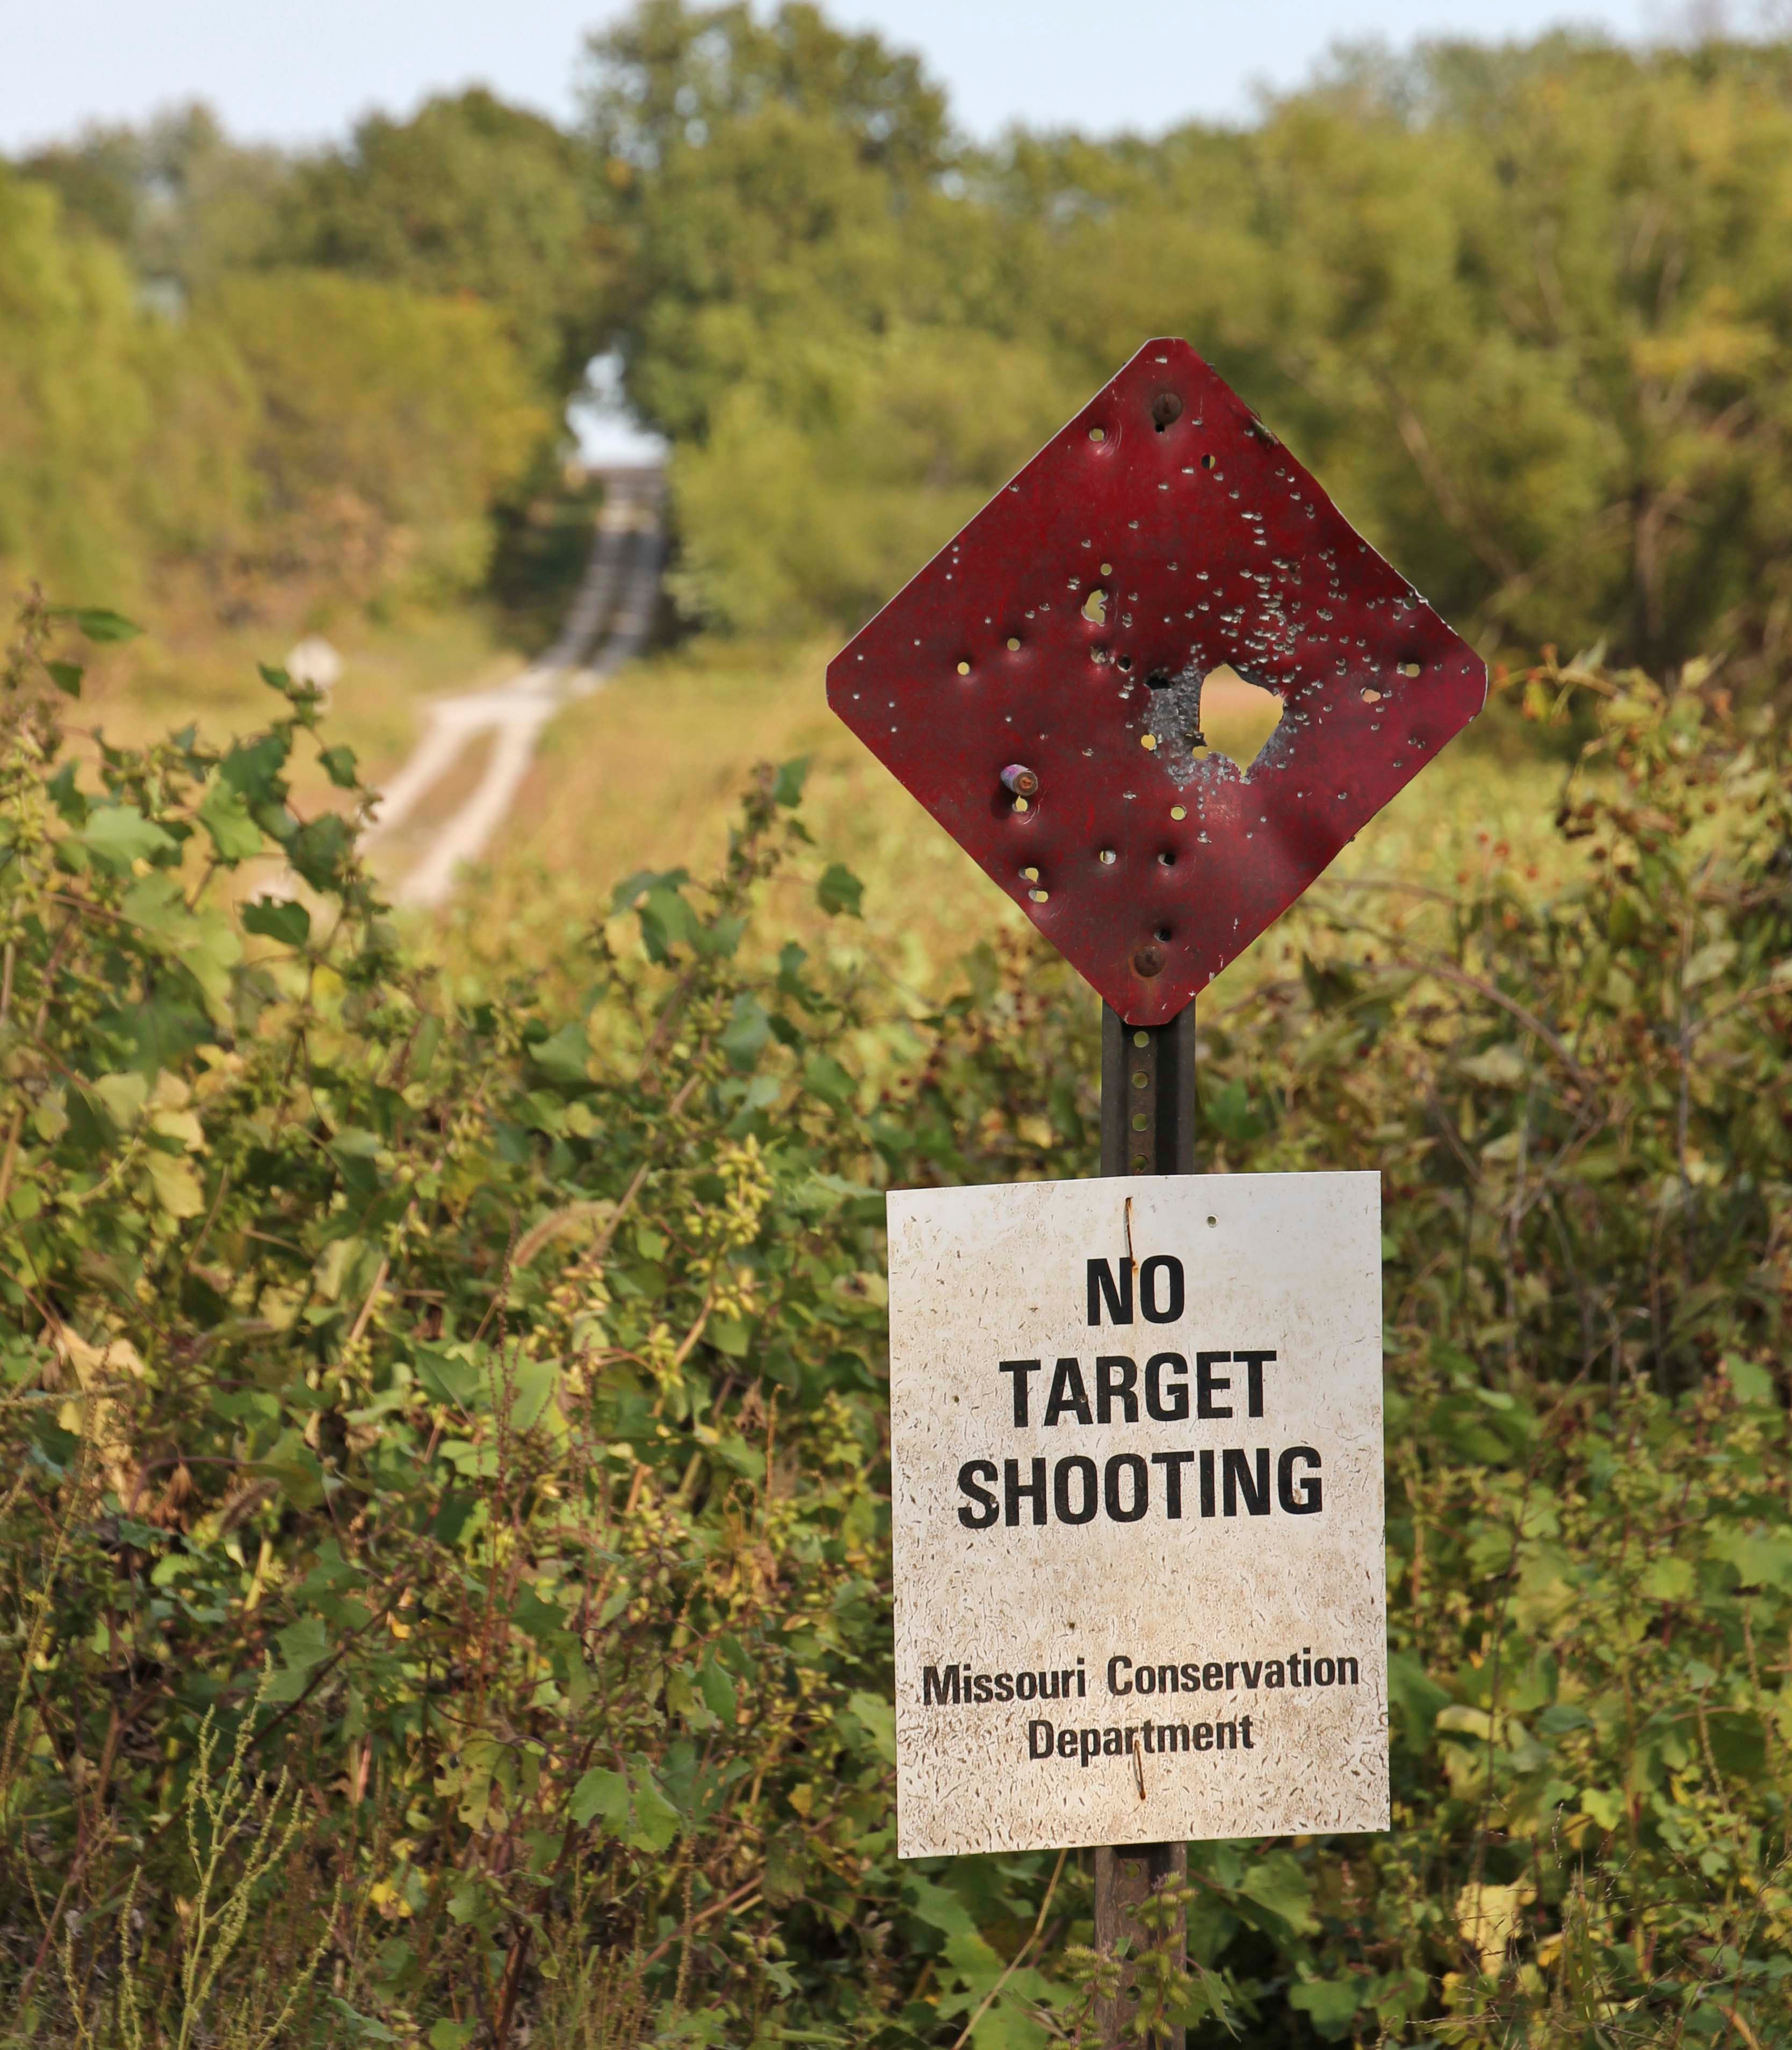 shooting at signs is unsafe